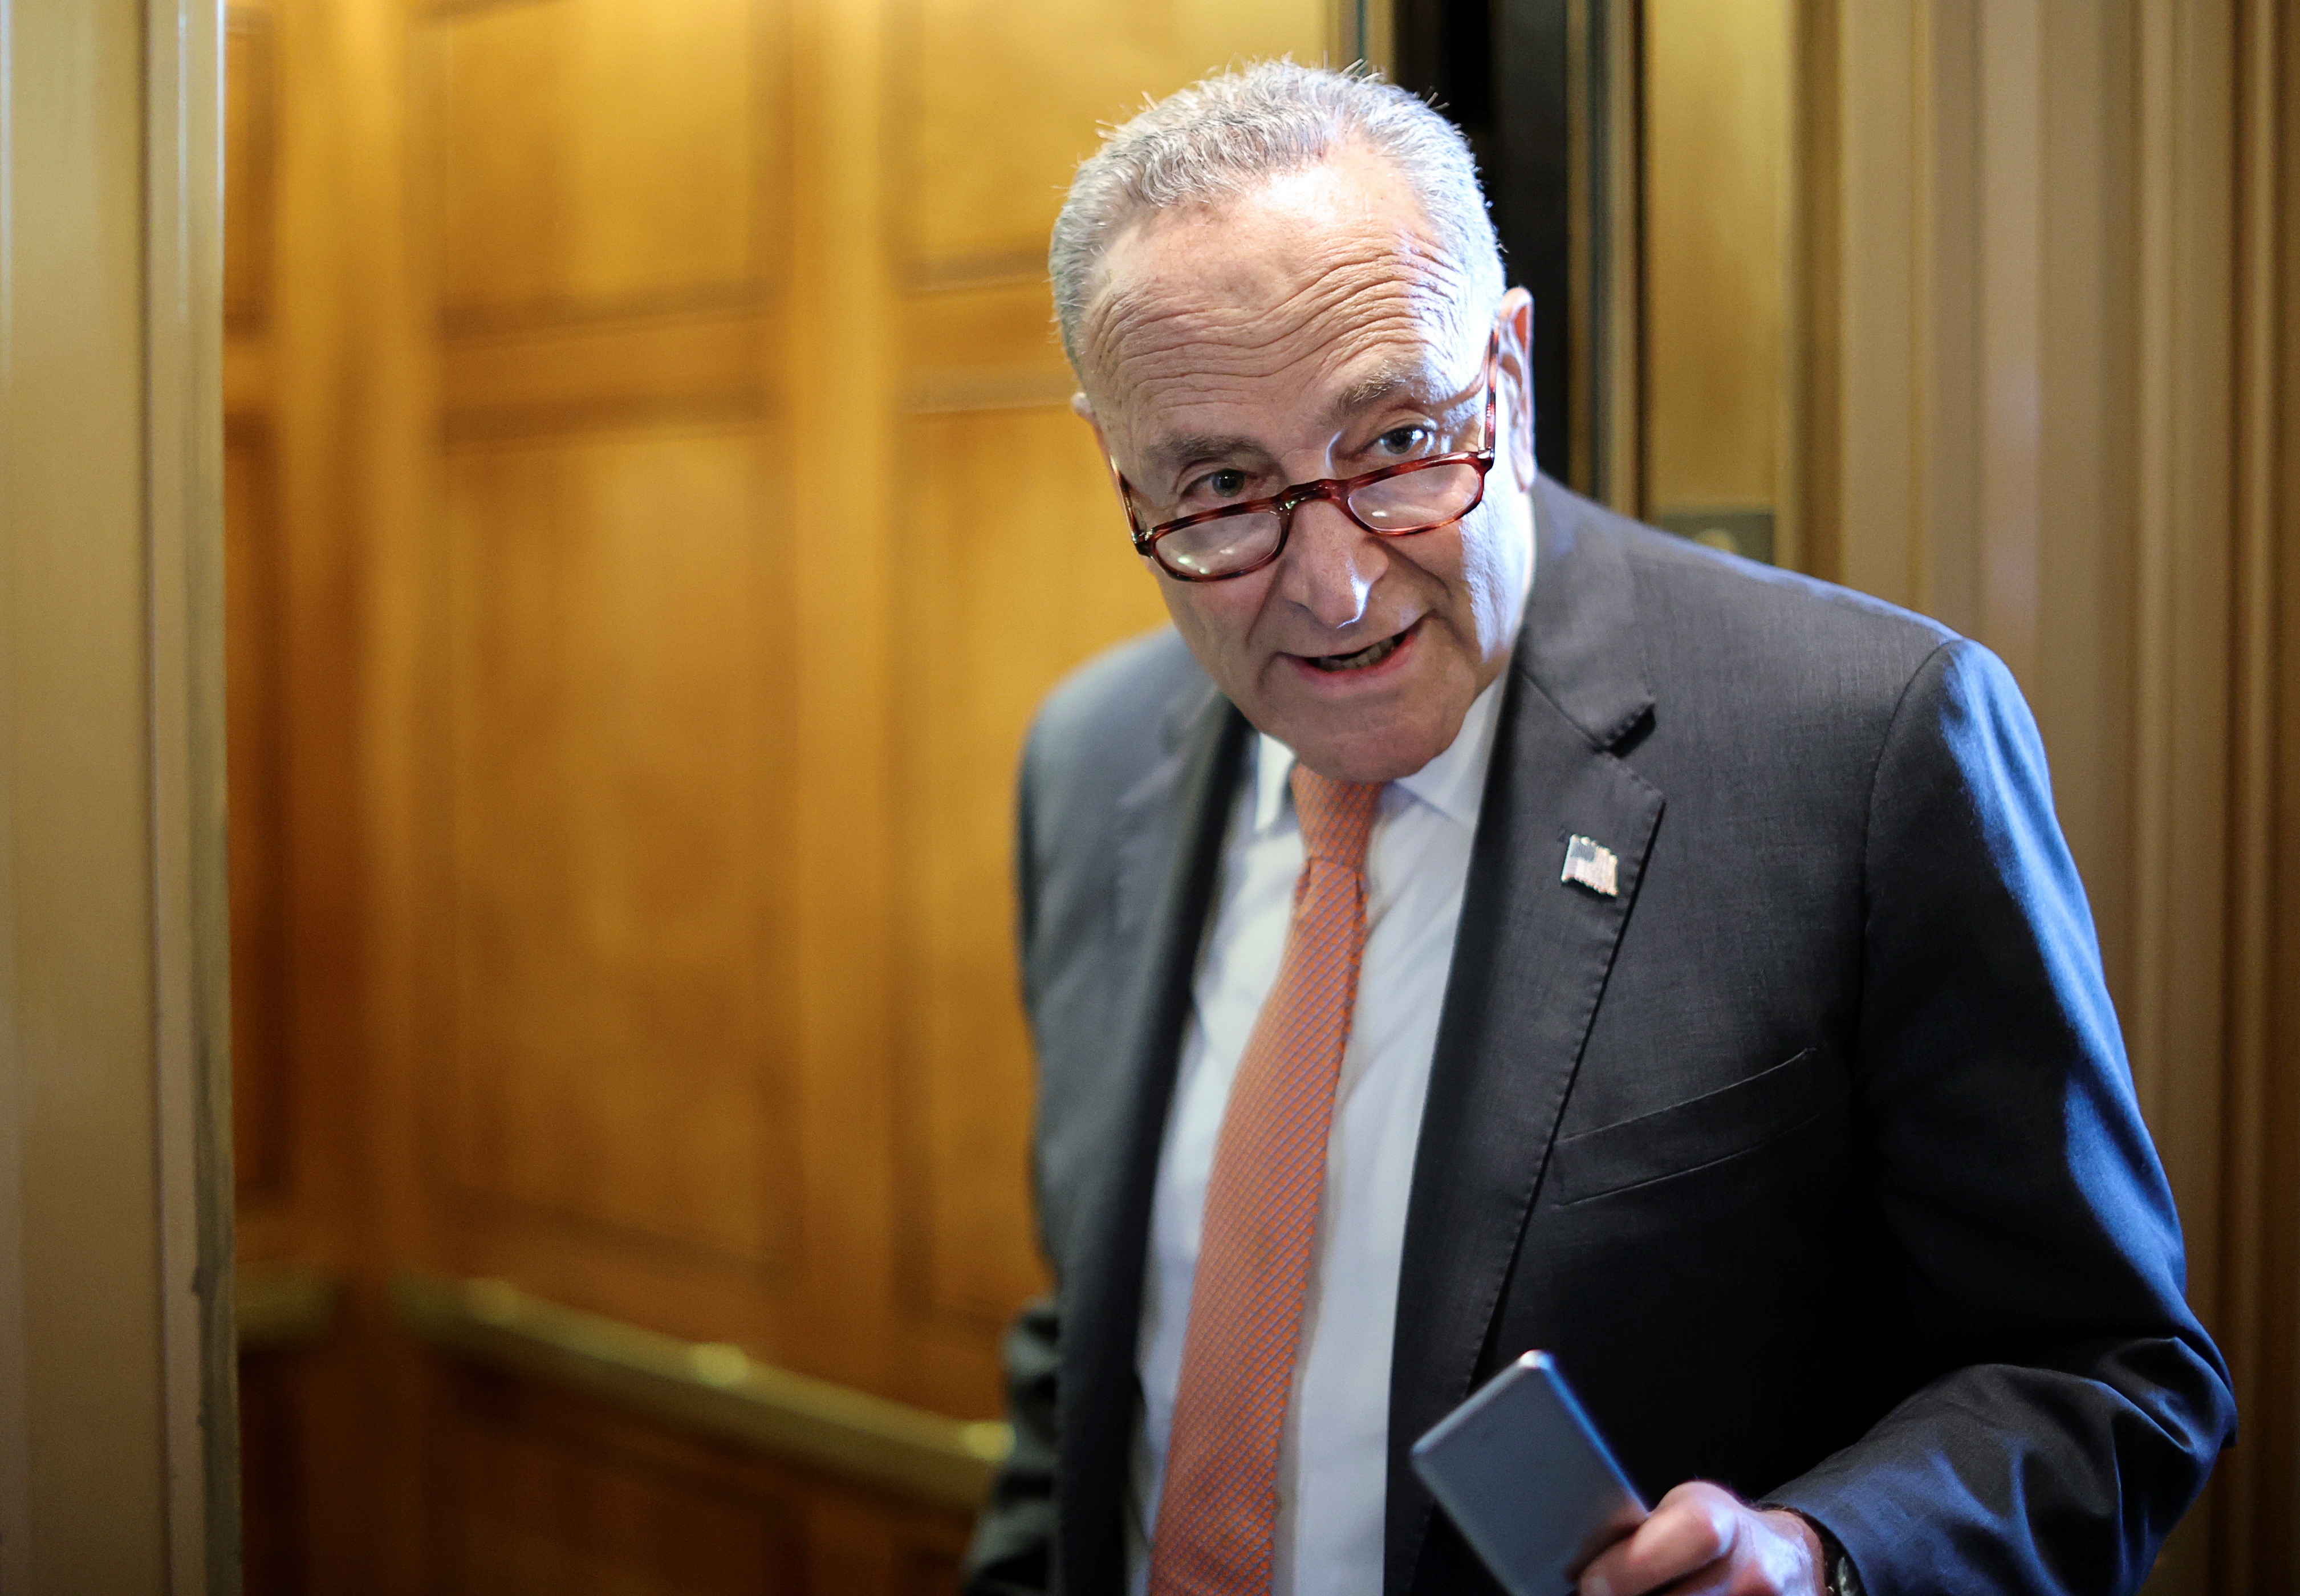 U.S. Senate Majority Leader Chuck Schumer (D-NY) speaks to a reporter about the status of a deal on infrastructure legislation as he departs the Senate floor at the U.S. Capitol in Washington, U.S., June 8, 2021. REUTERS/Jonathan Ernst